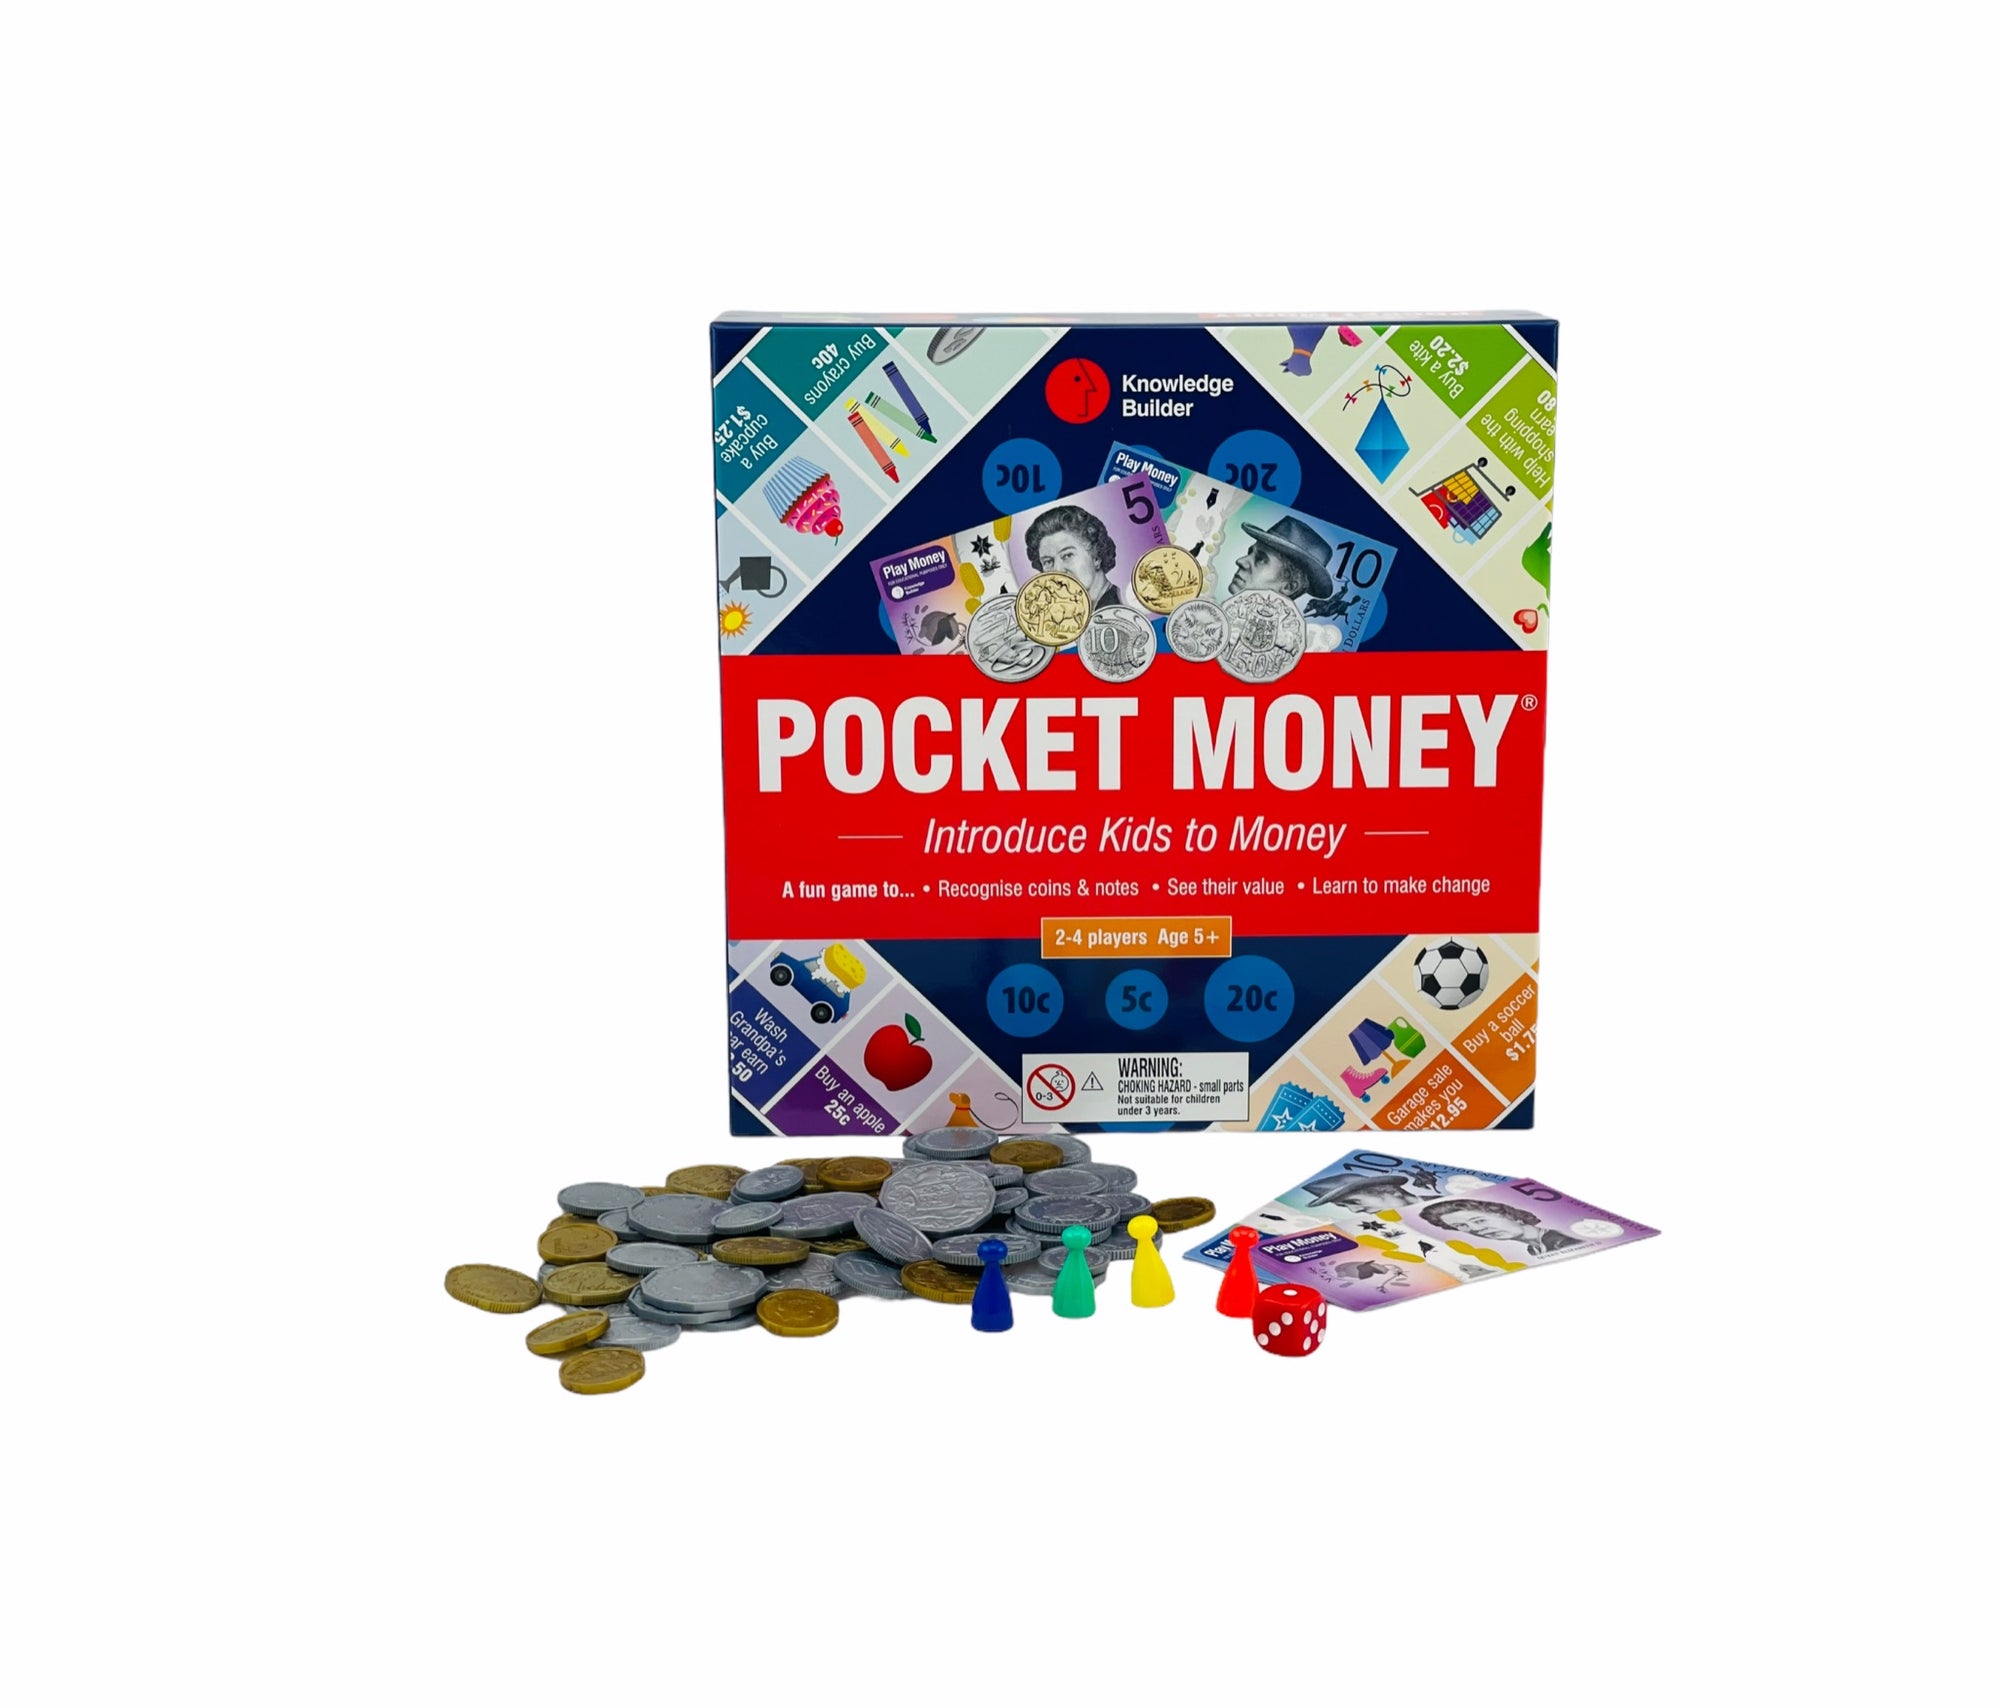 Knowledge Builder Pocket Money Game with coins, playing piecss, and notes displayed in front of box